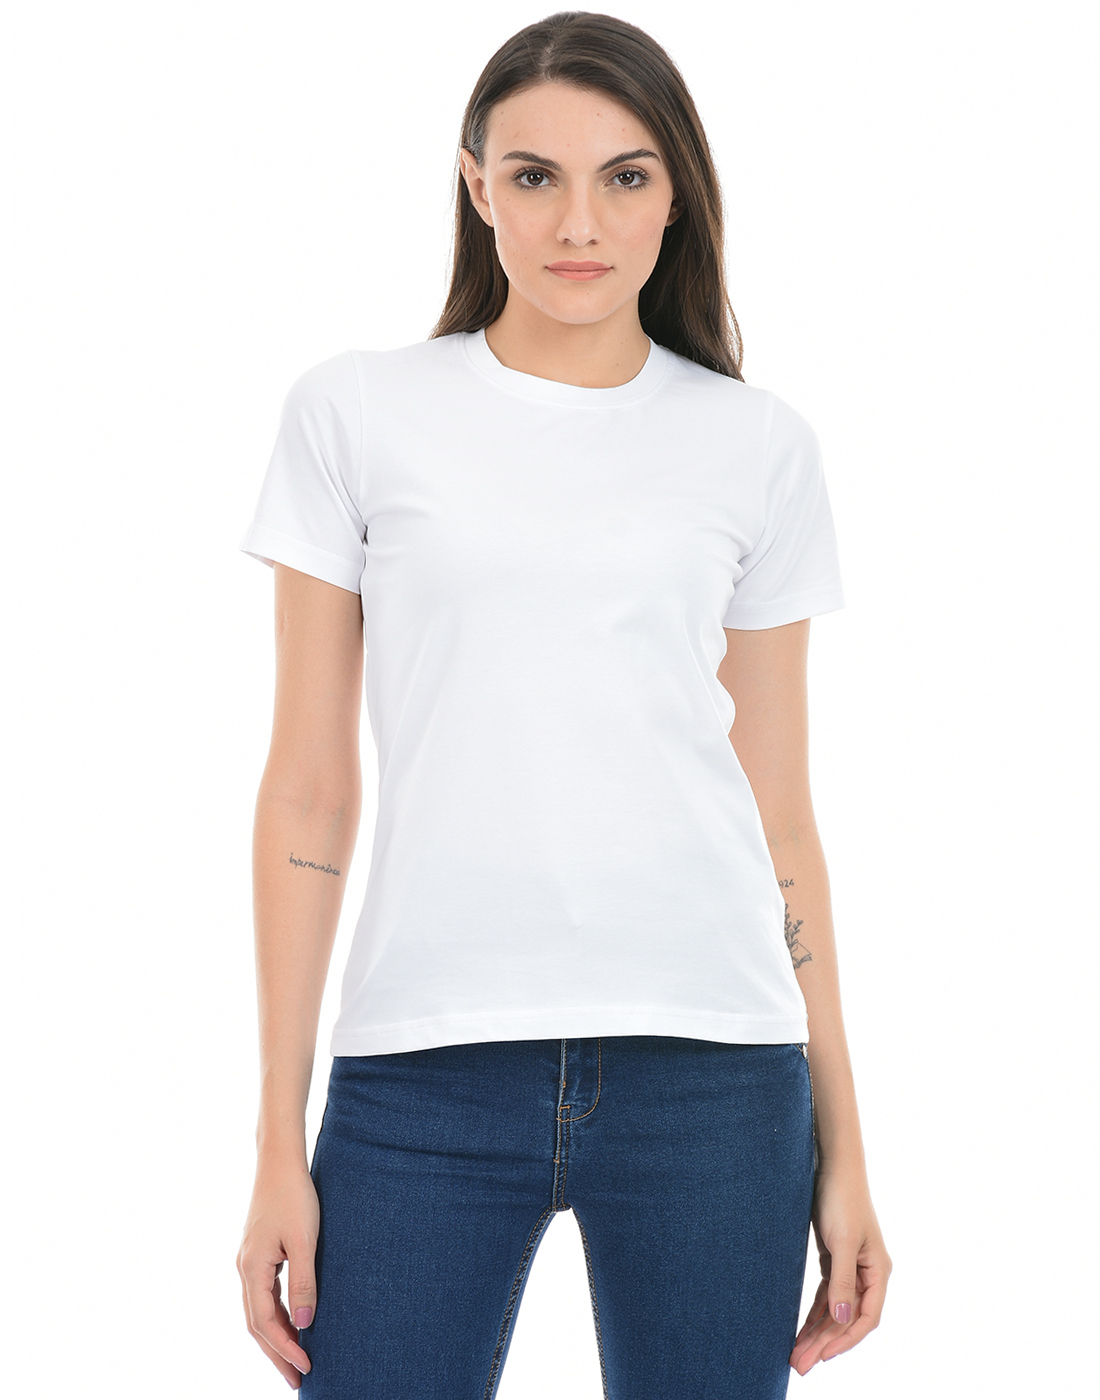 ONEWAY Round Neck Half Sleeves Solid T-Shirt for Women|Cotton Blend|Regular Fit|Stretchable|Women Casual Westernwear